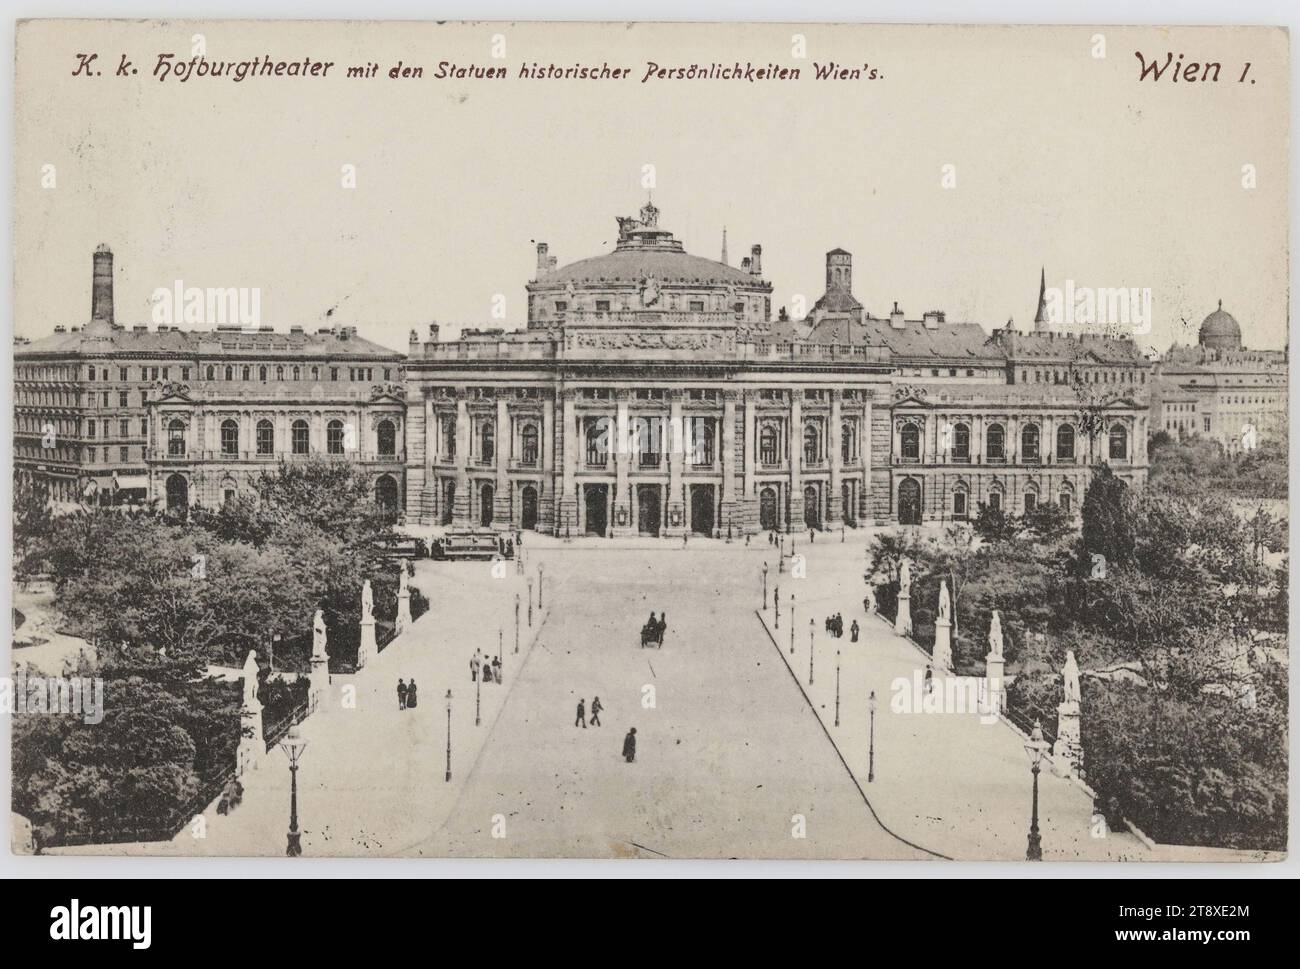 Vienna I. K. k. Hofburgtheater with the statues of historical personalities of Vienna, Carl (Karl) Ledermann Jr, Producer, 1907, paperboard, Collotype, height×width 9×13, 8 cm, Inscription, FROM, No Ab sender, Postmark 'Wien 64', TO, Vienna, ADDRESS, Mrs, Ing, IV, Radeckgasse 1, MESSAGE, Dearest Dela! Am ready with great pleasure to come tomorrow, if I do not disturb. I'm sorry I didn't write sooner, but since half the family was sick for a change, I didn't know for sure whether I would be able to get away. Now, for the time being, everything is back to the old way Stock Photo